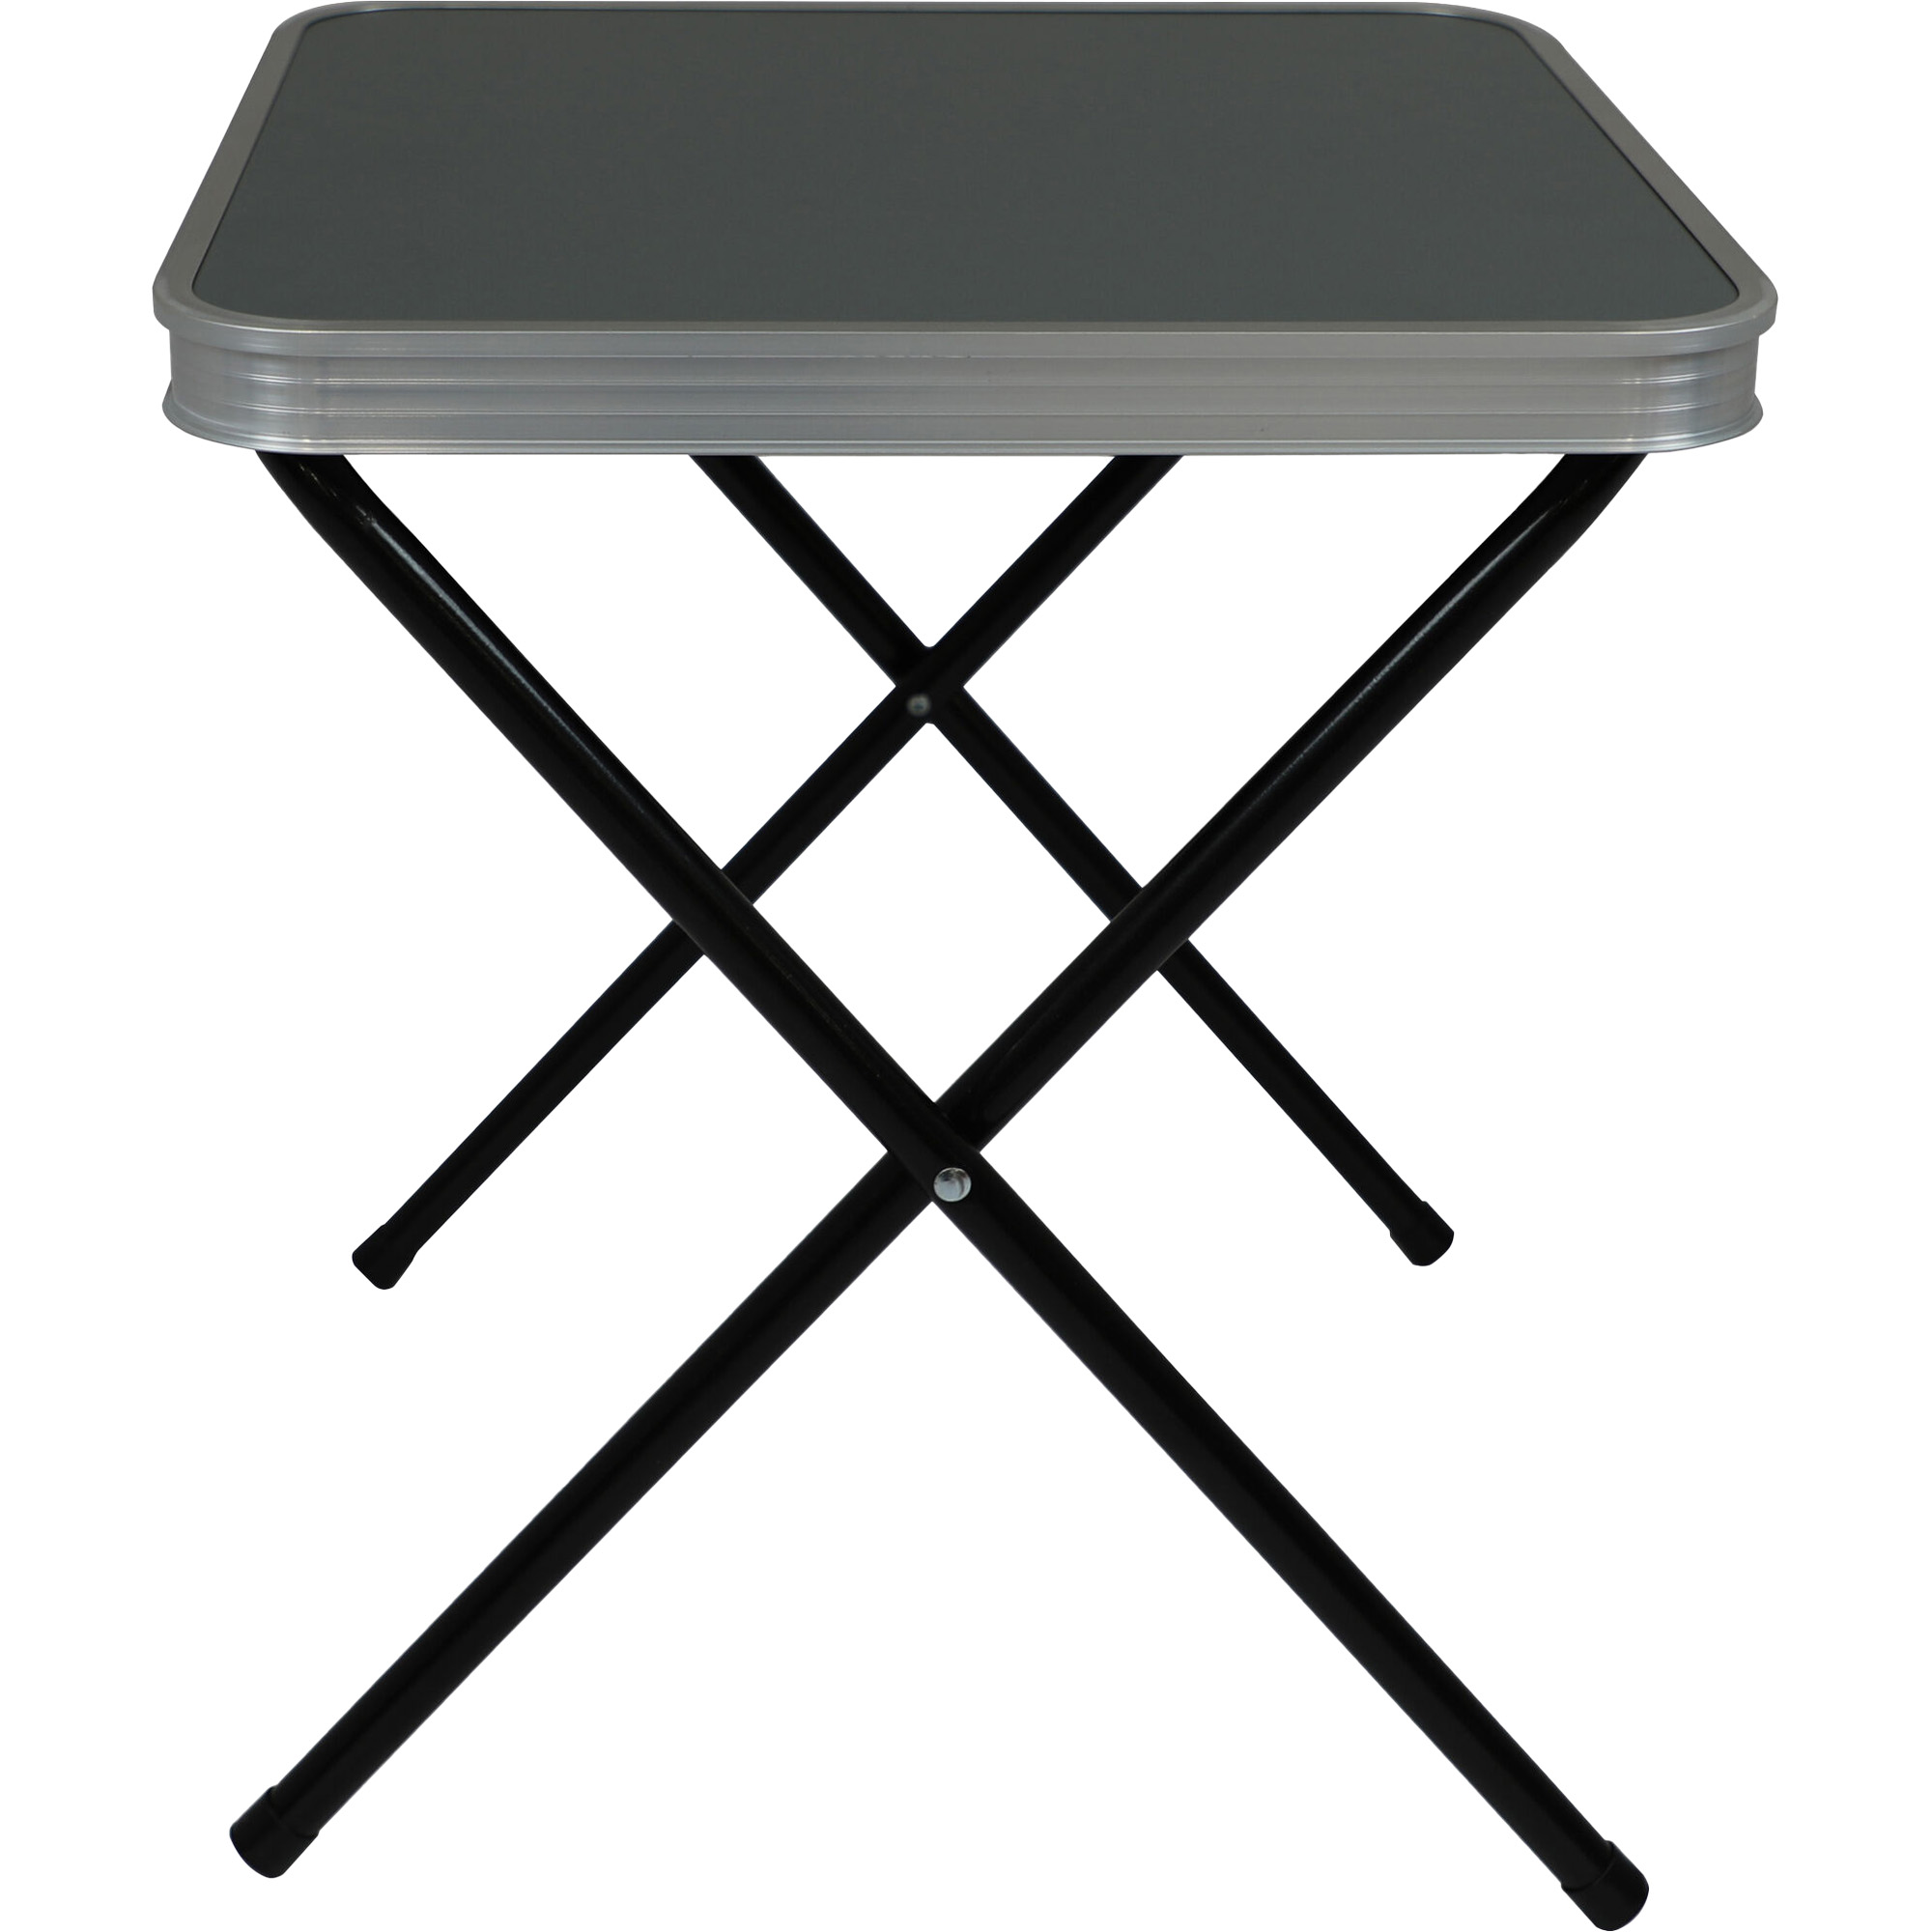 Vango Athena 3-in-1 Camping Stool, Table & Footrest